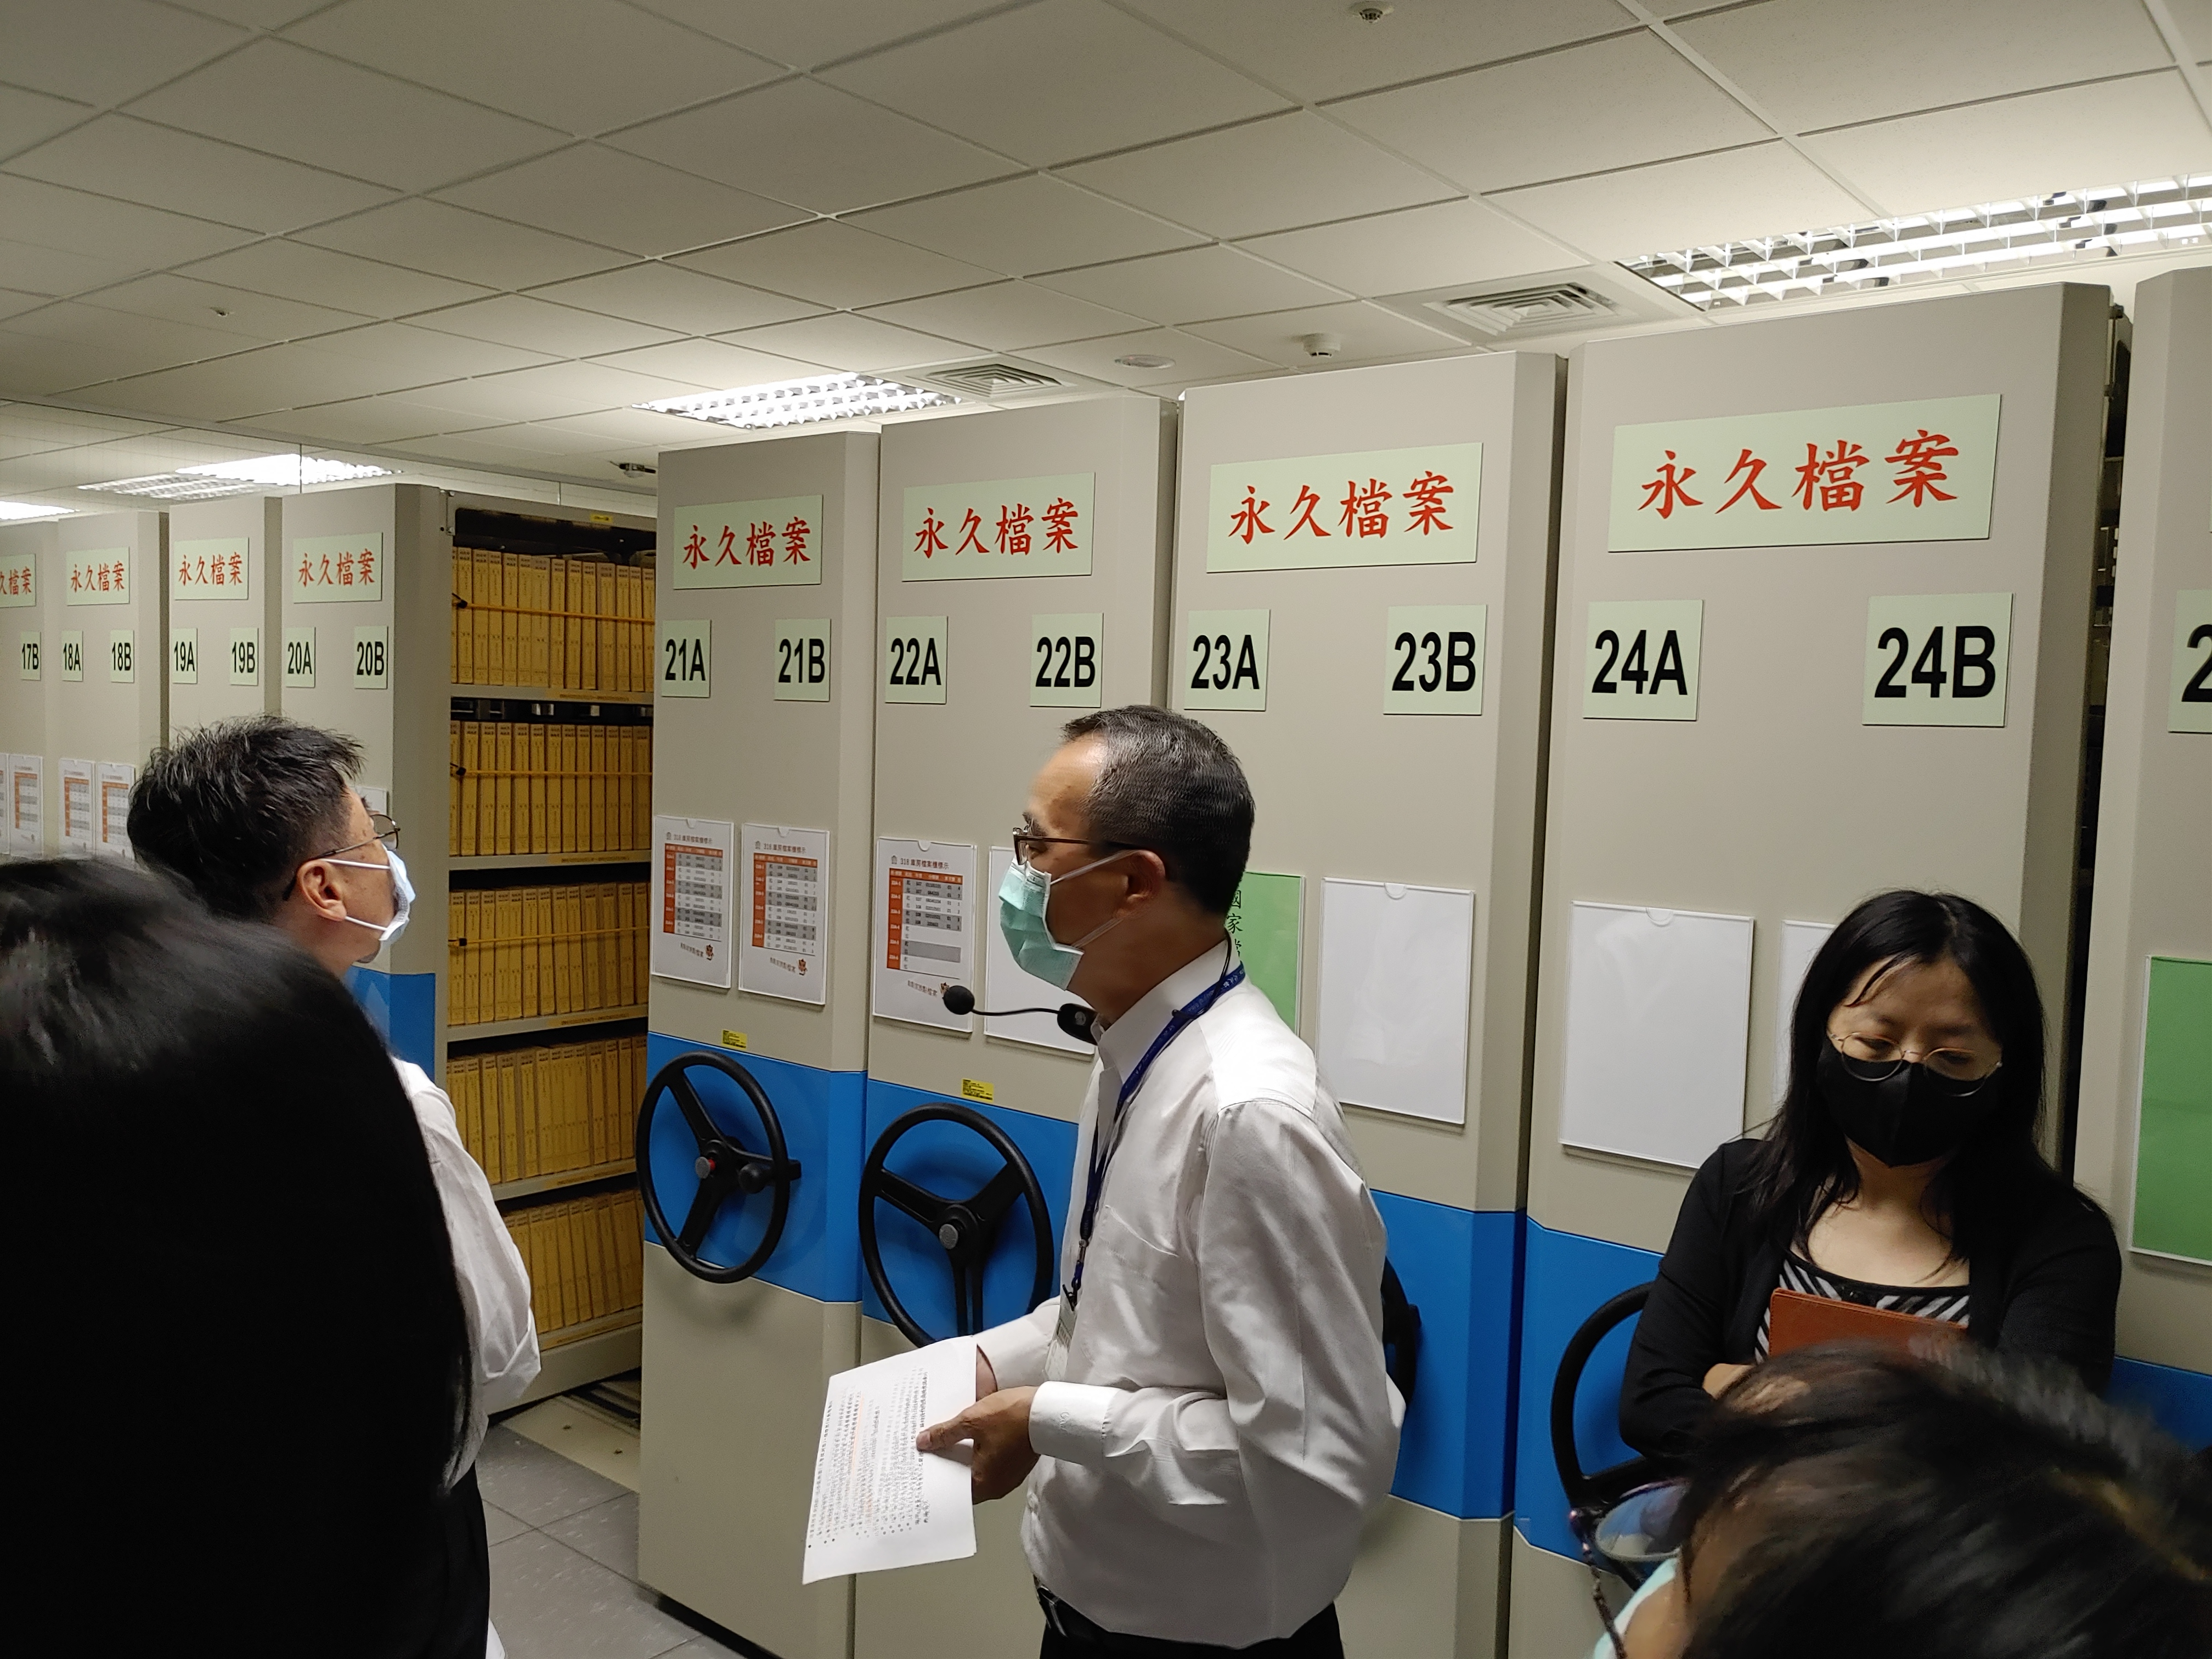 Members of the NTA’s working group for the Records Management Quality Awards take a detail view of the archives depository of the Taxation Administration and ask that Administration’s Secretariat Director for advices.